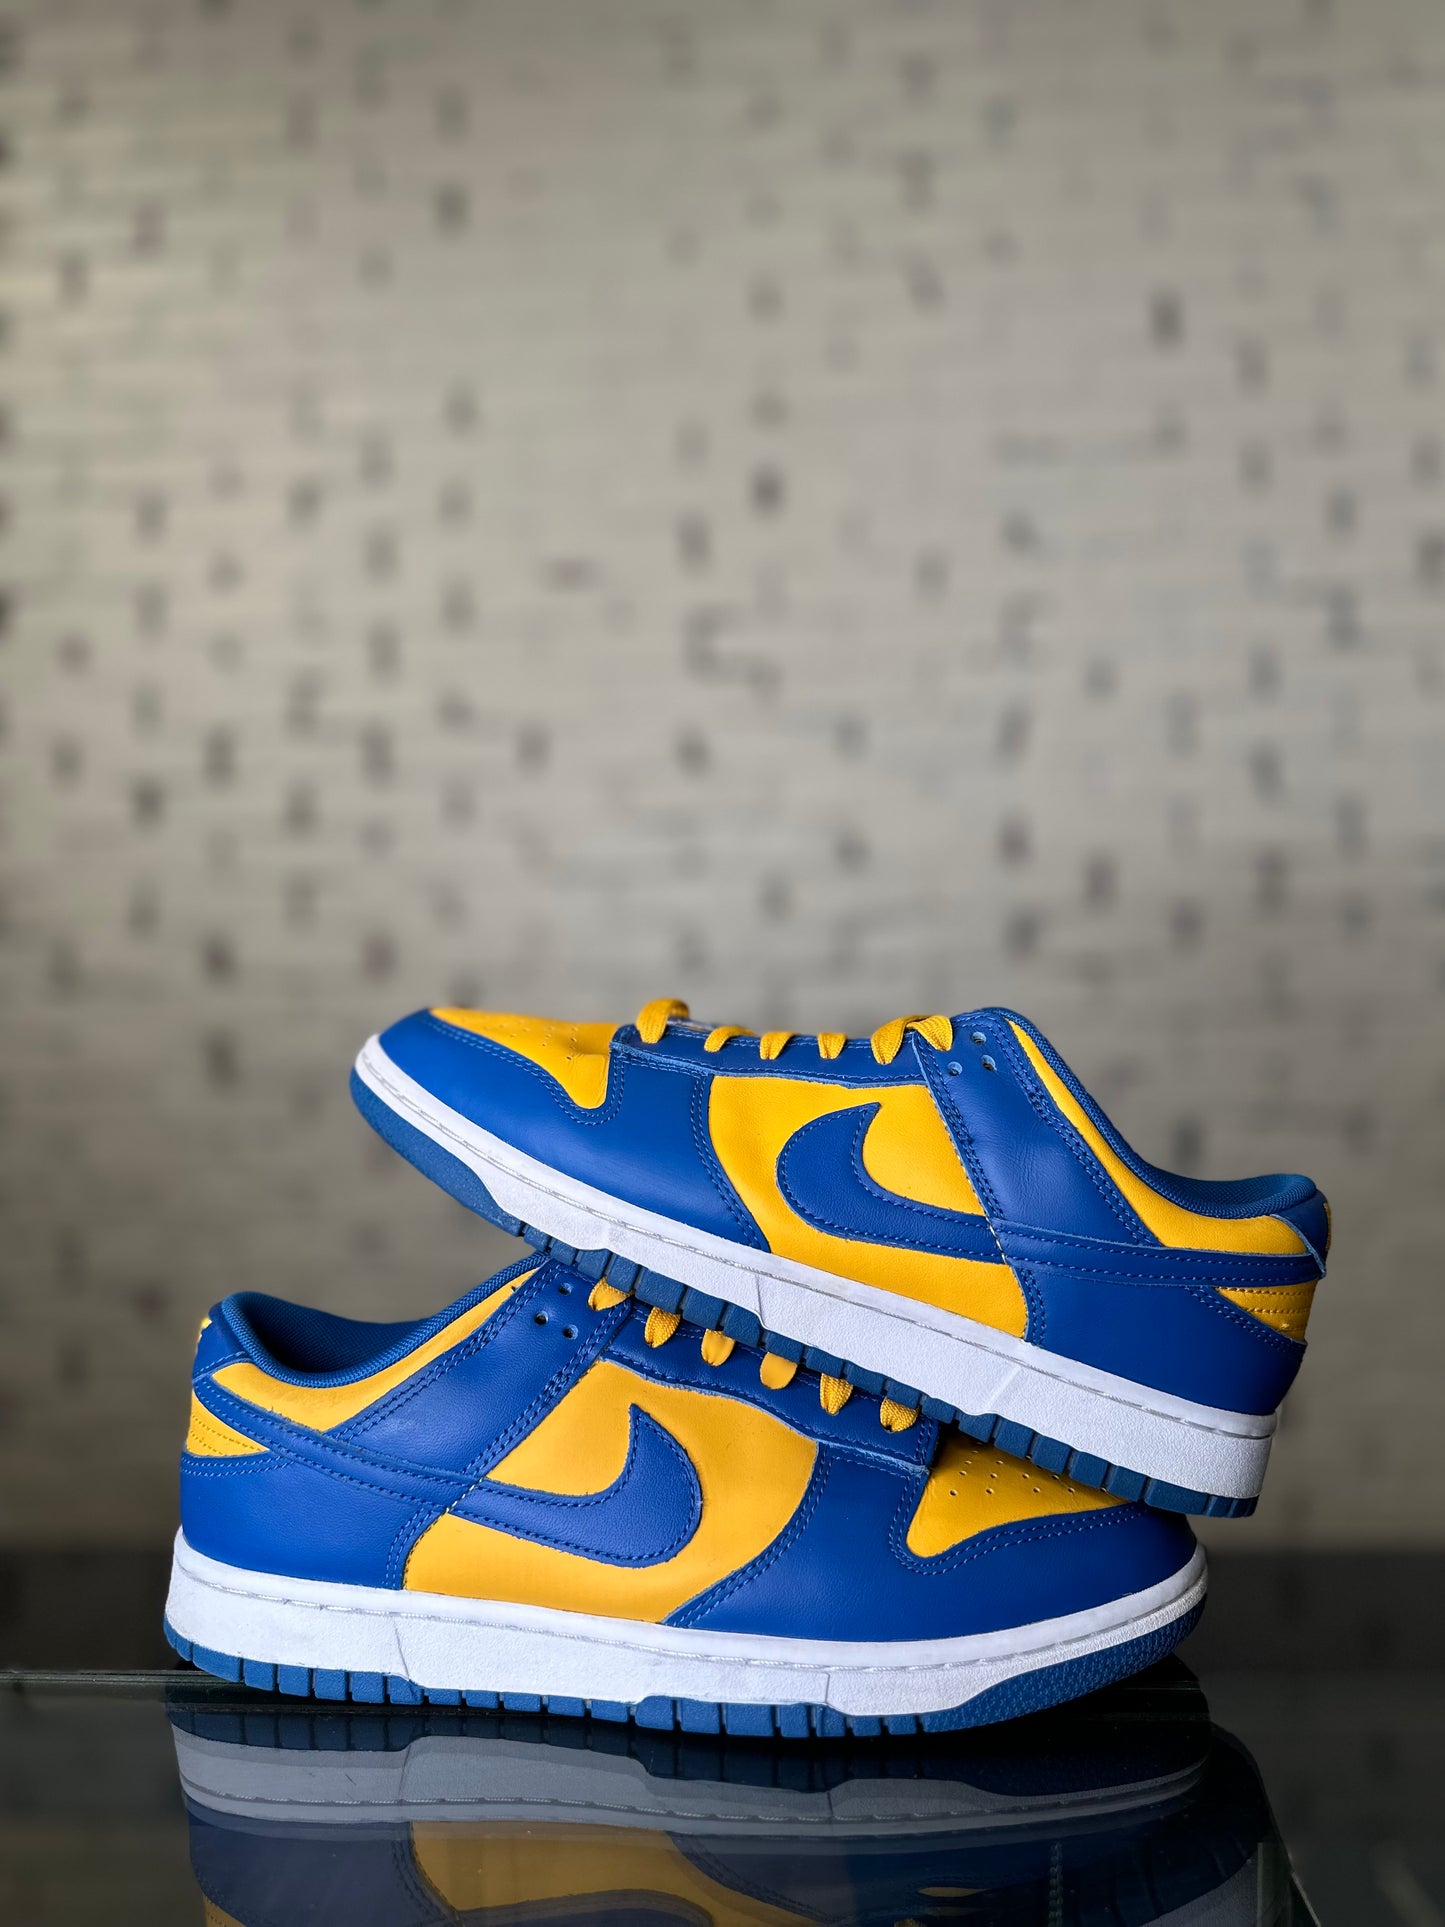 Nike Dunk Low “UCLA” Size 9 PO RB